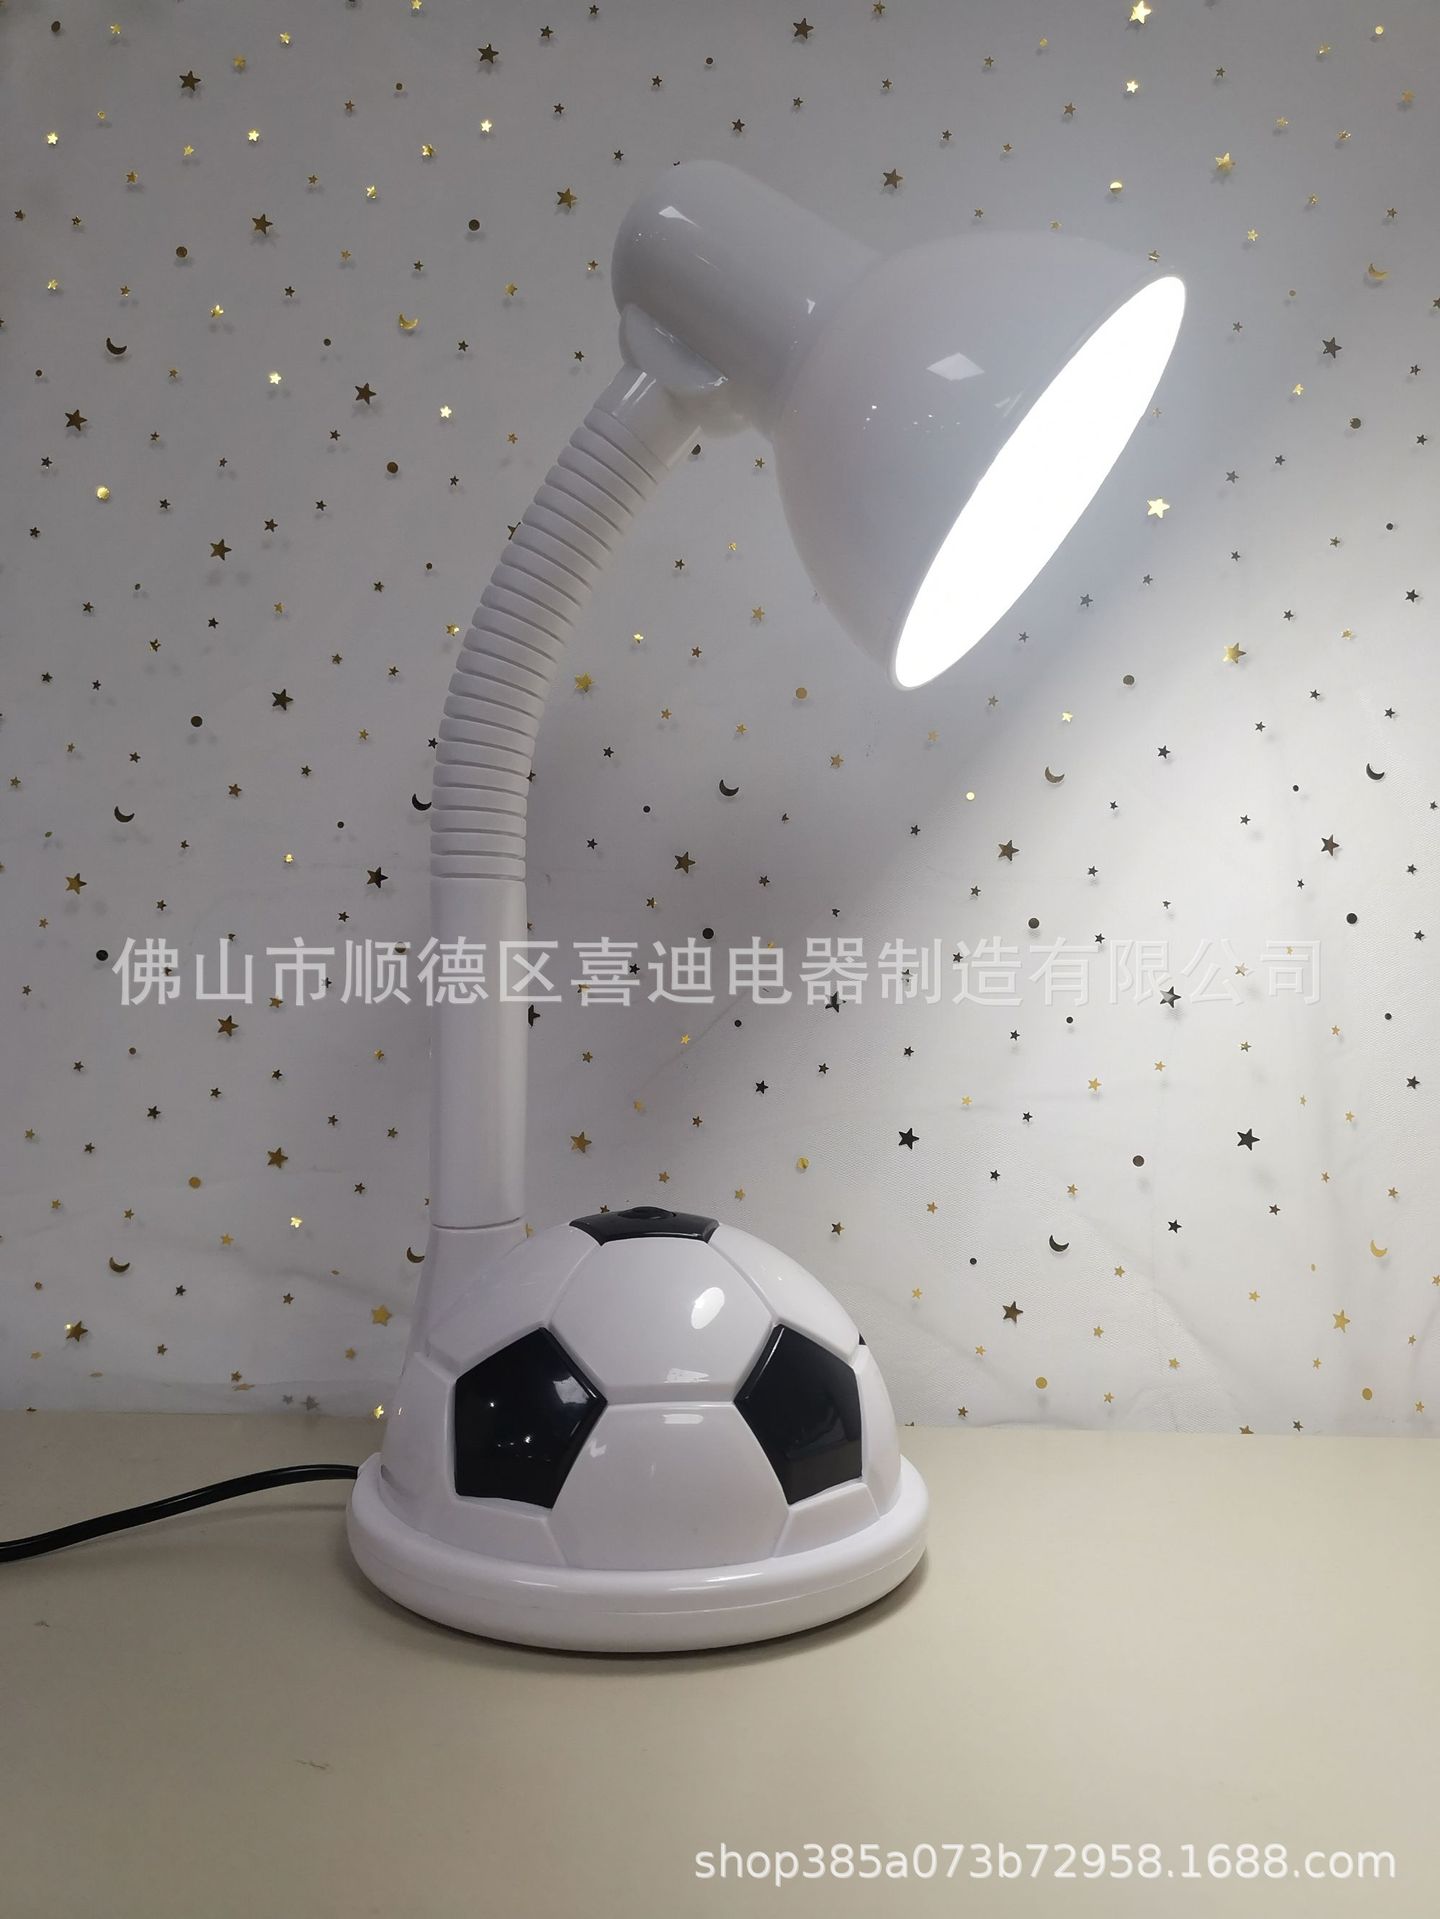 Football E27/Led Student Dormitory Home Office Reading Seat Cartoon World Cup Concept Eye Protection Table Lamp